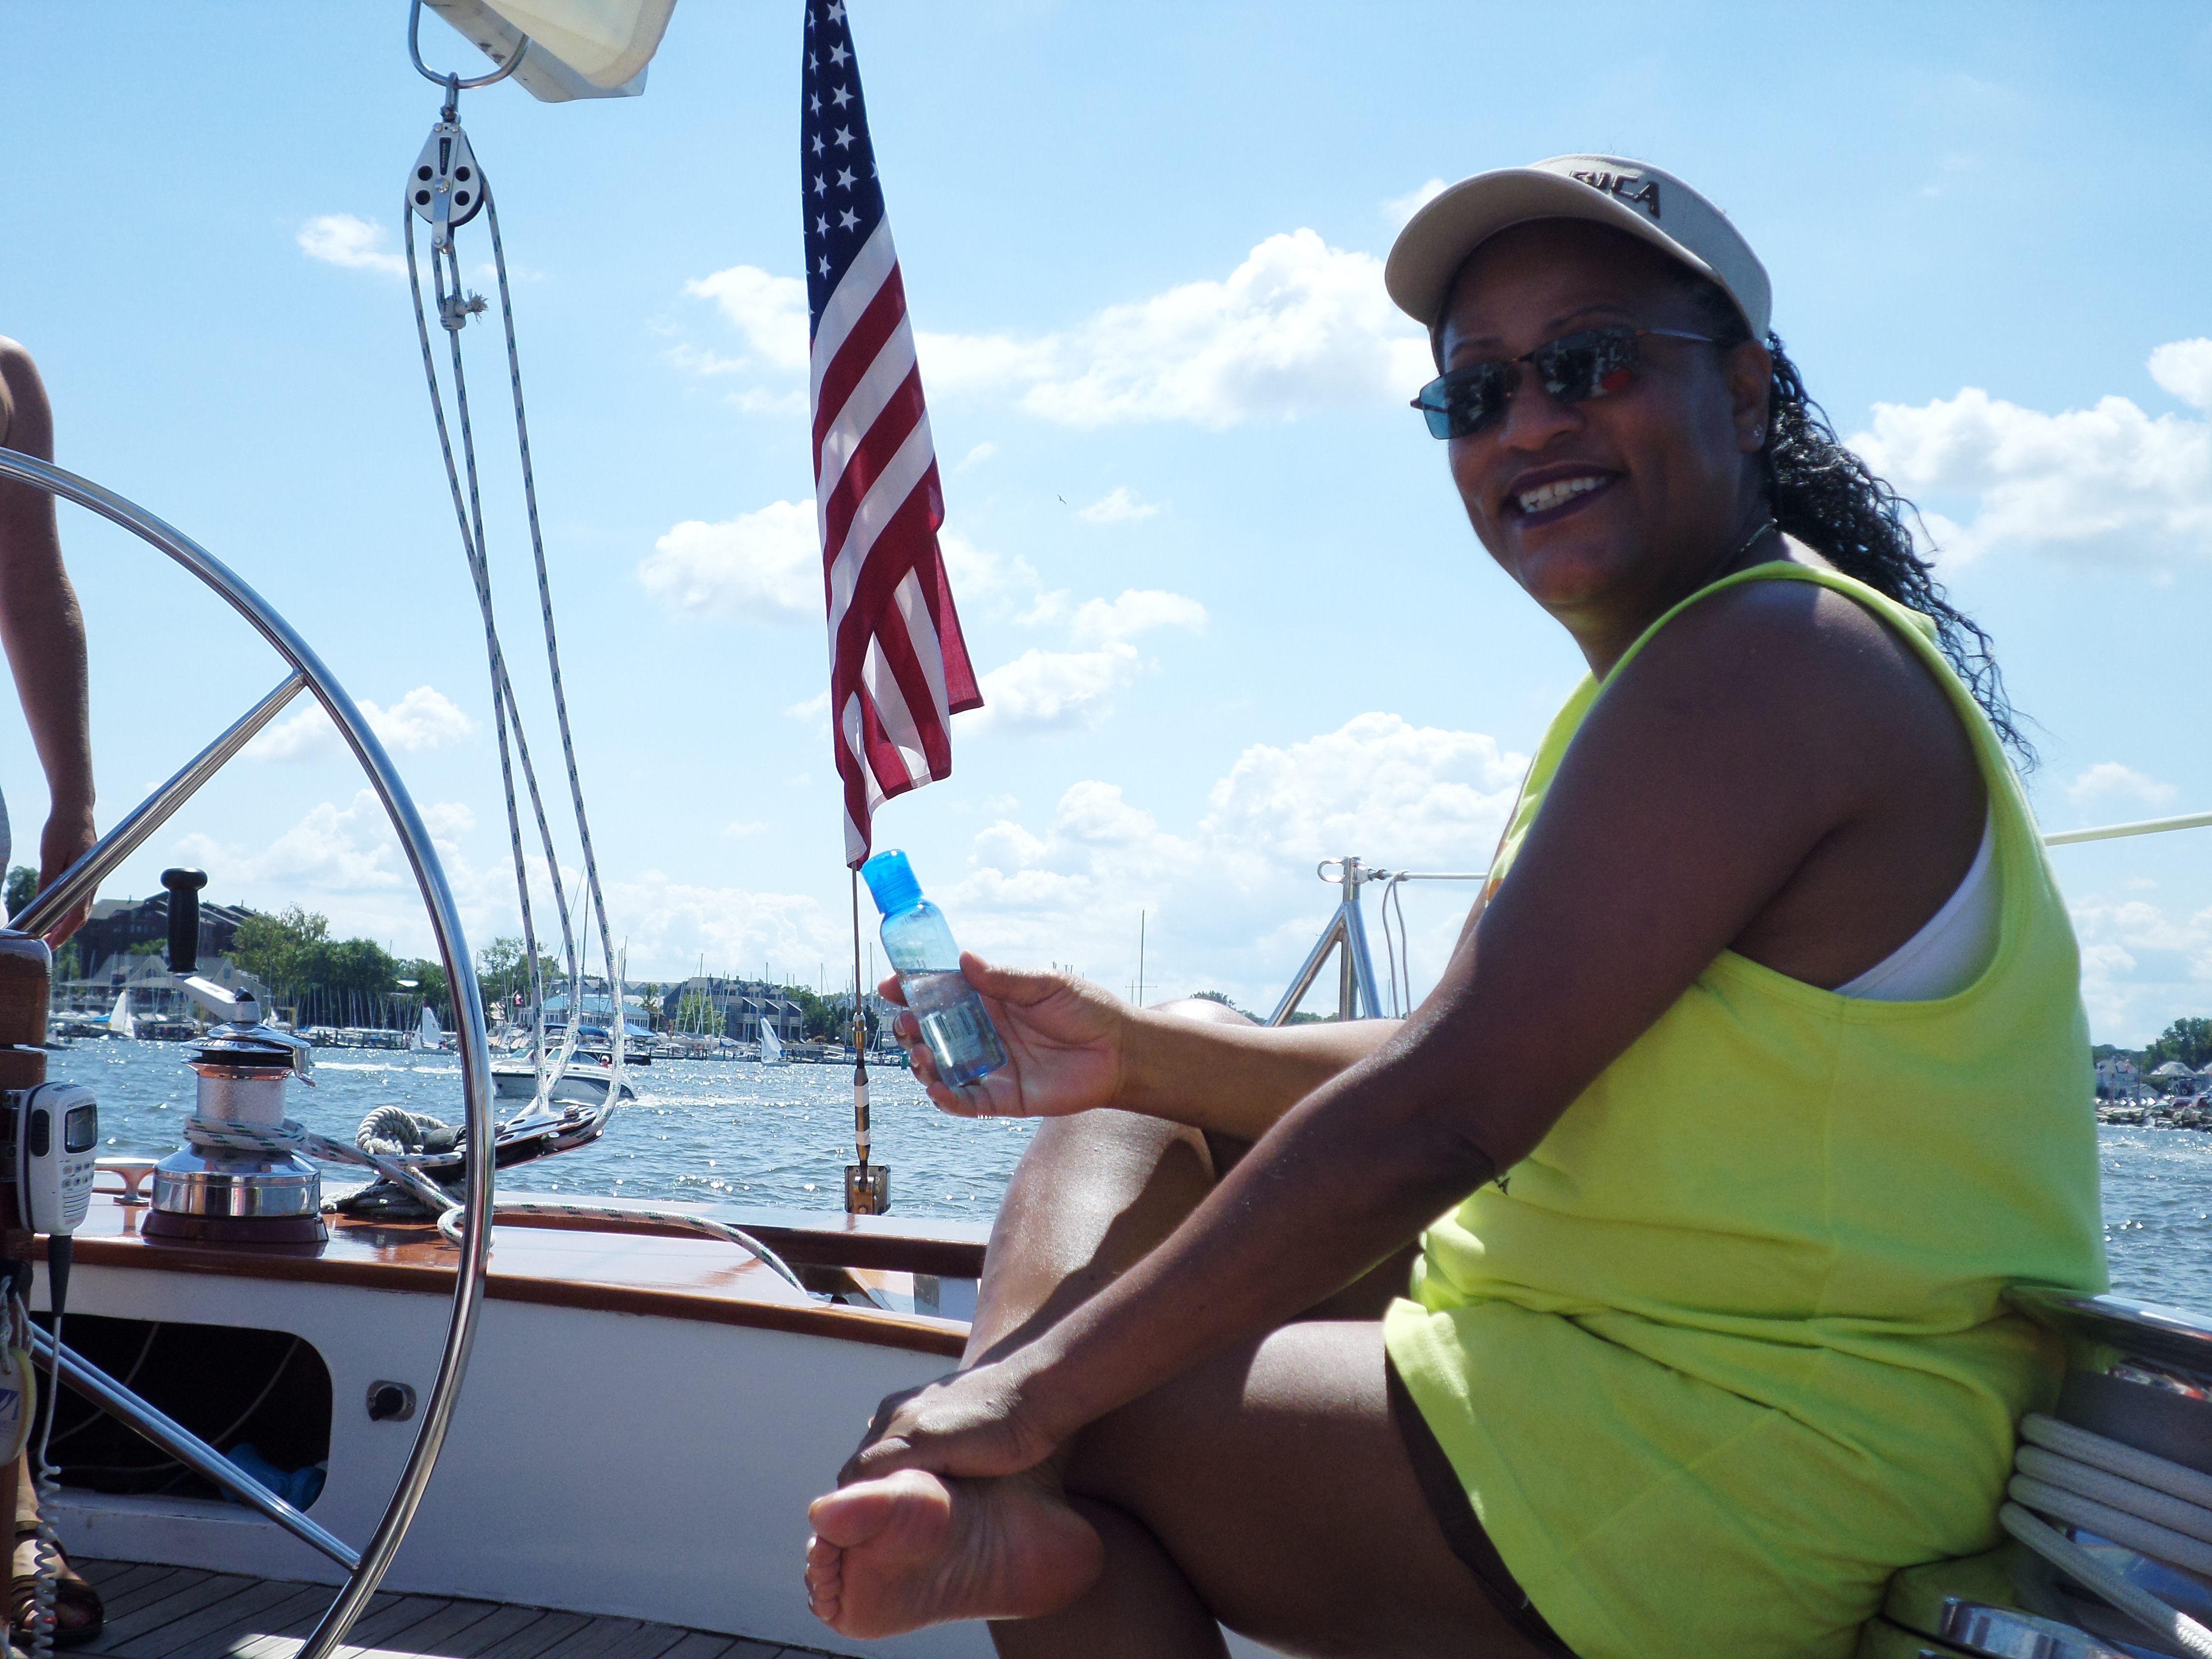 Women smiling on the schooner on a sunny day